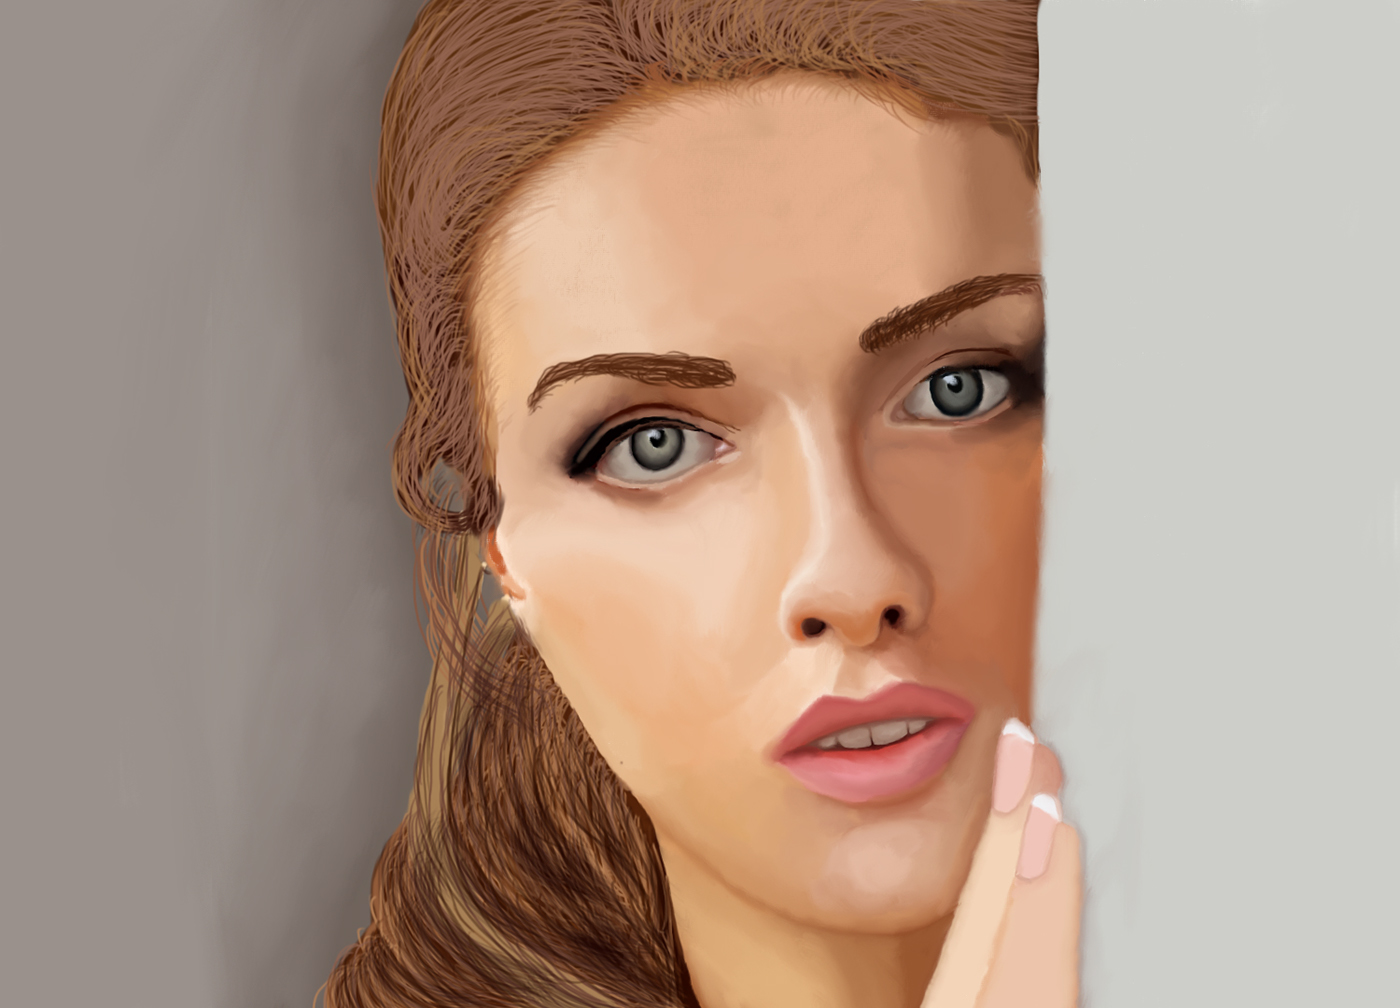 The beauty painting digital painting ILLUSTRATION 